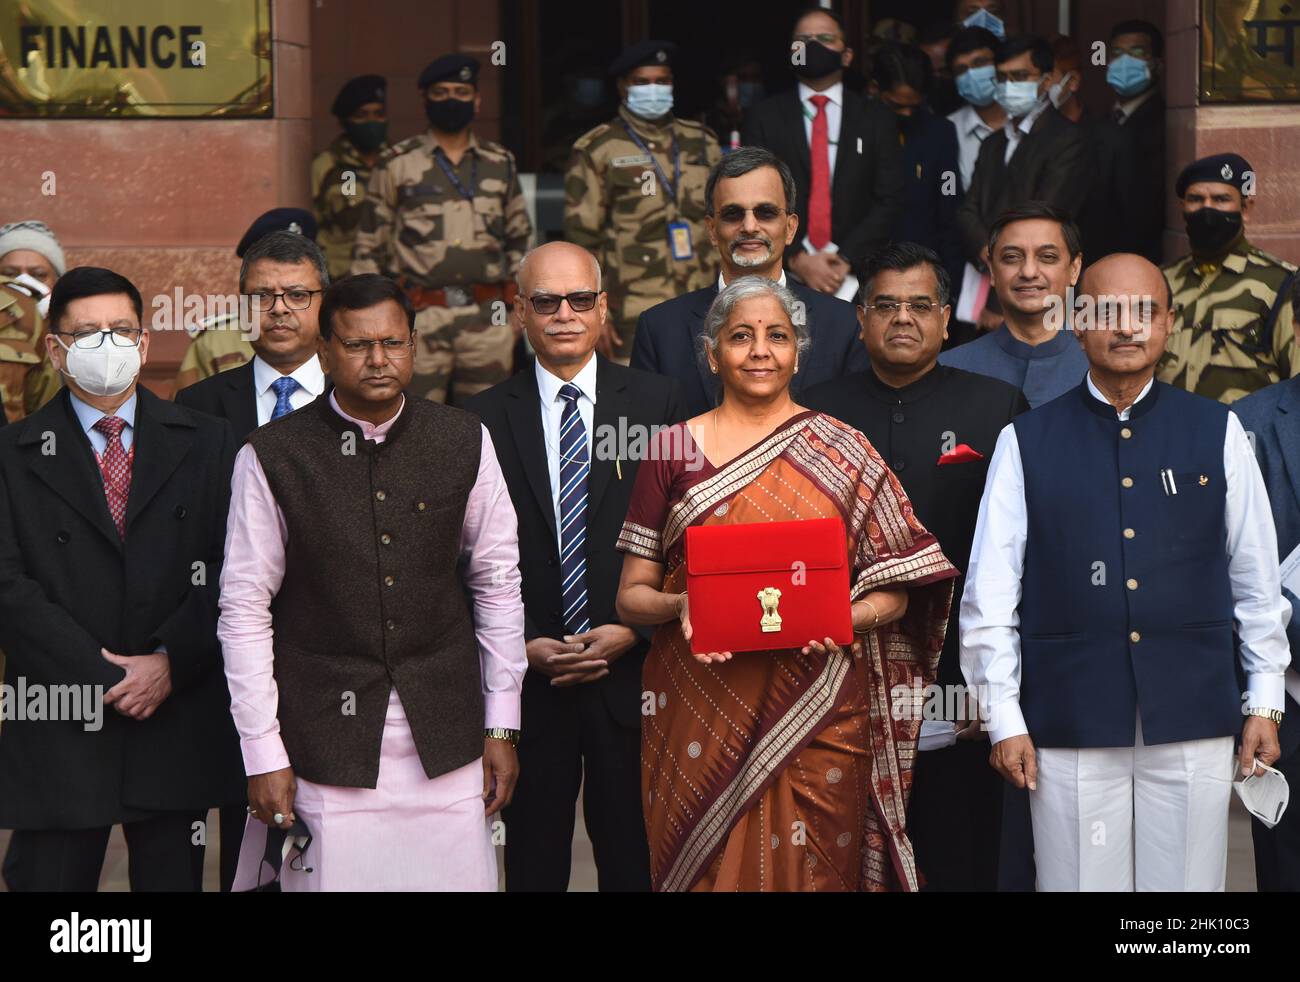 NEW DELHI, INDIA - FEBRUARY 1: Union Minister of Finance Nirmala Sitharaman is seen holding the tab instead of traditional ‘bahi khata' along with MoS Finance Pankaj Chaudhary, Bhagwat Karad and other senior officials before leaving from Ministry of Finance to the Parliament to present Union Budget 2022-23 on February 1, 2022 in New Delhi, India. Nirmala Sitharaman, who presented Union Budget 2022 in Parliament on Tuesday, said that it will lay the foundation for economic growth through public investment as Asia's third-largest economy emerges from a pandemic-induced slump. (Photo by Ajay Agga Stock Photo